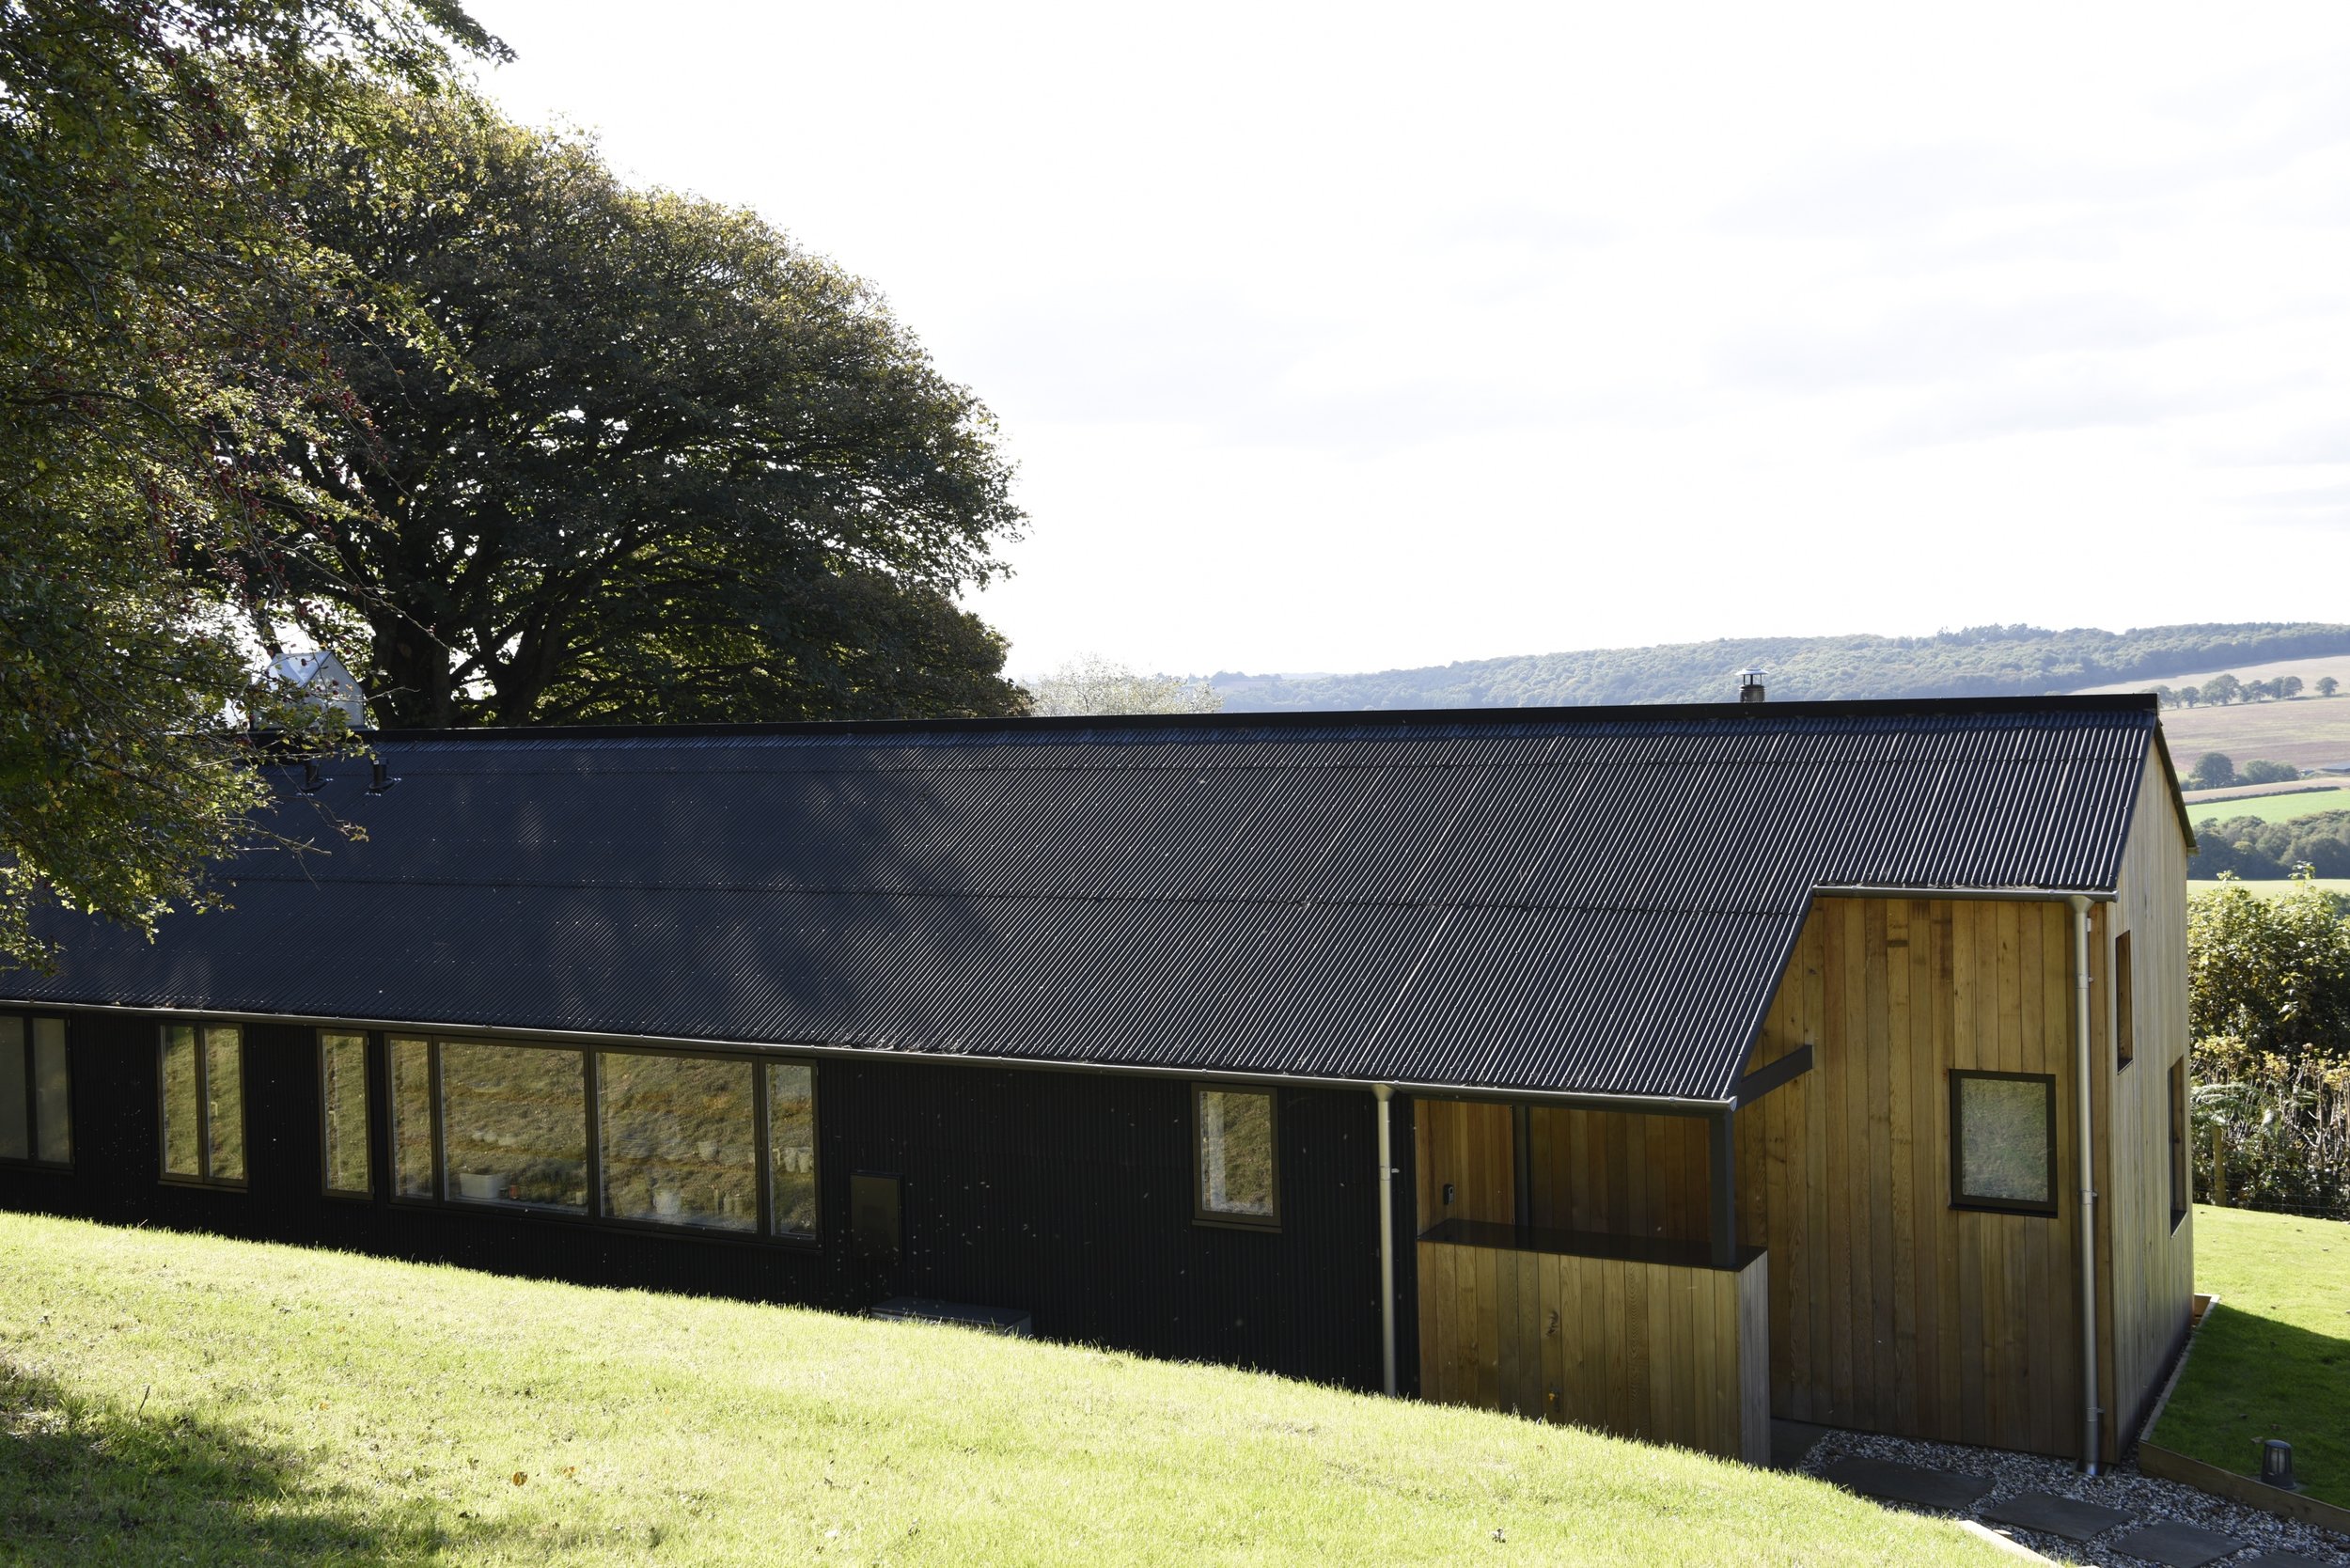  The Chickenshed aims to combine great architecture, clean design and wonderful views across the beautiful Monmouthshire countryside... 